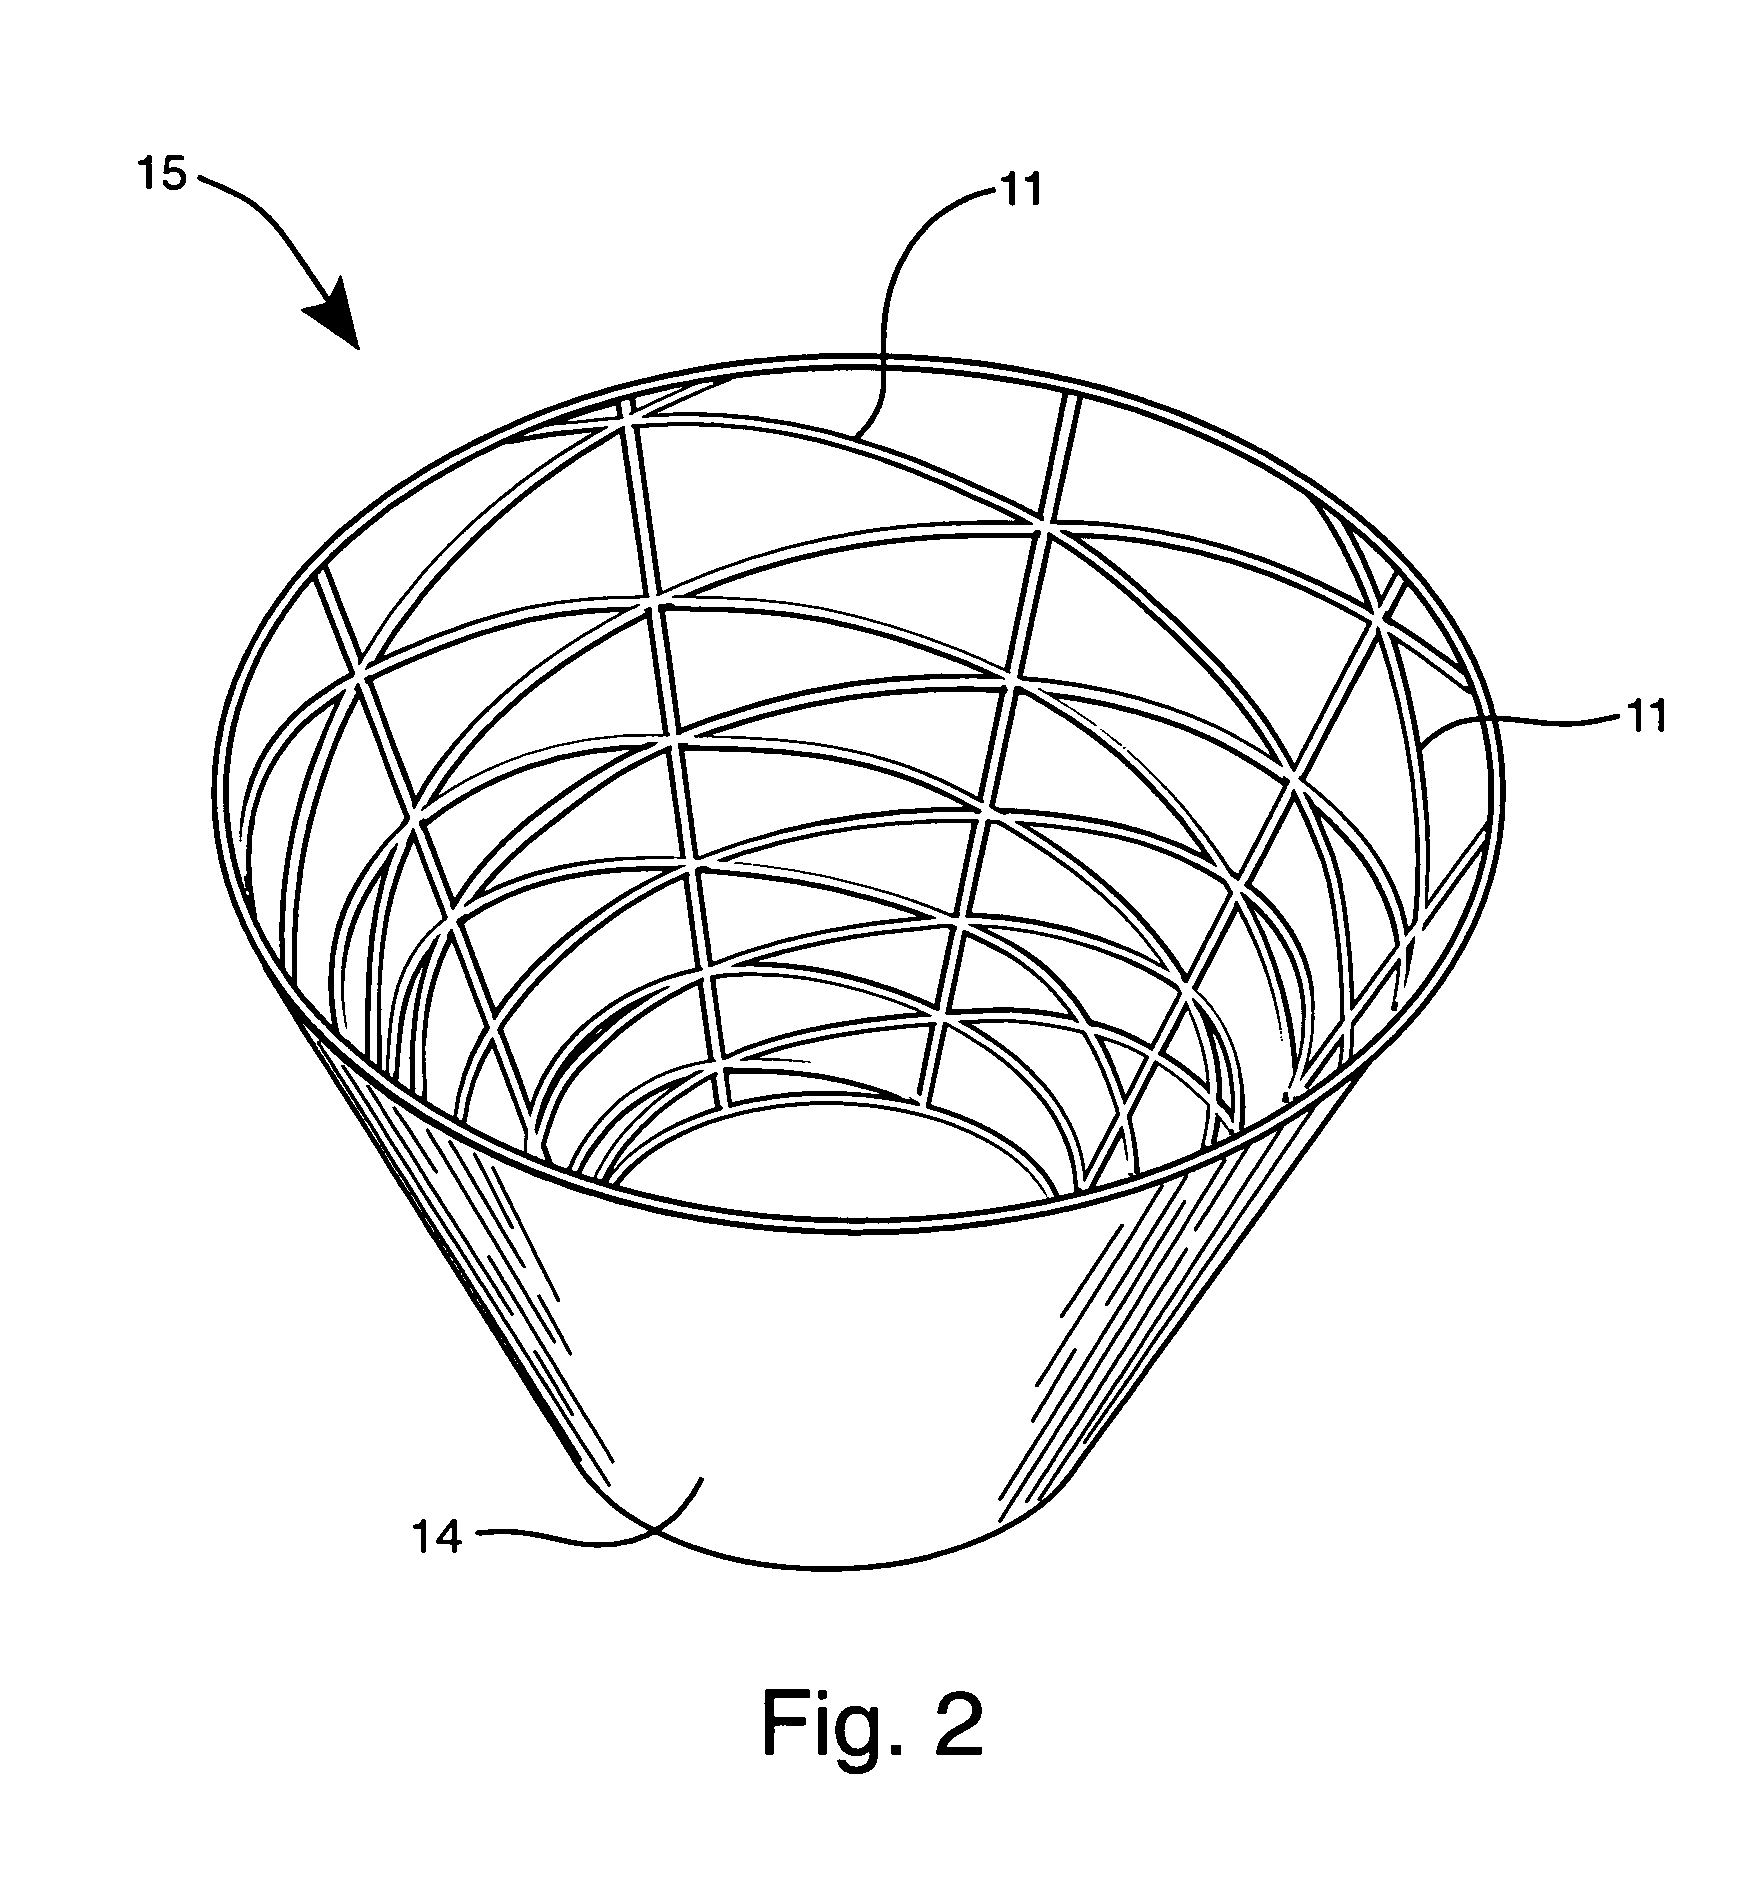 Method for fabricating rib-stiffened composite structures